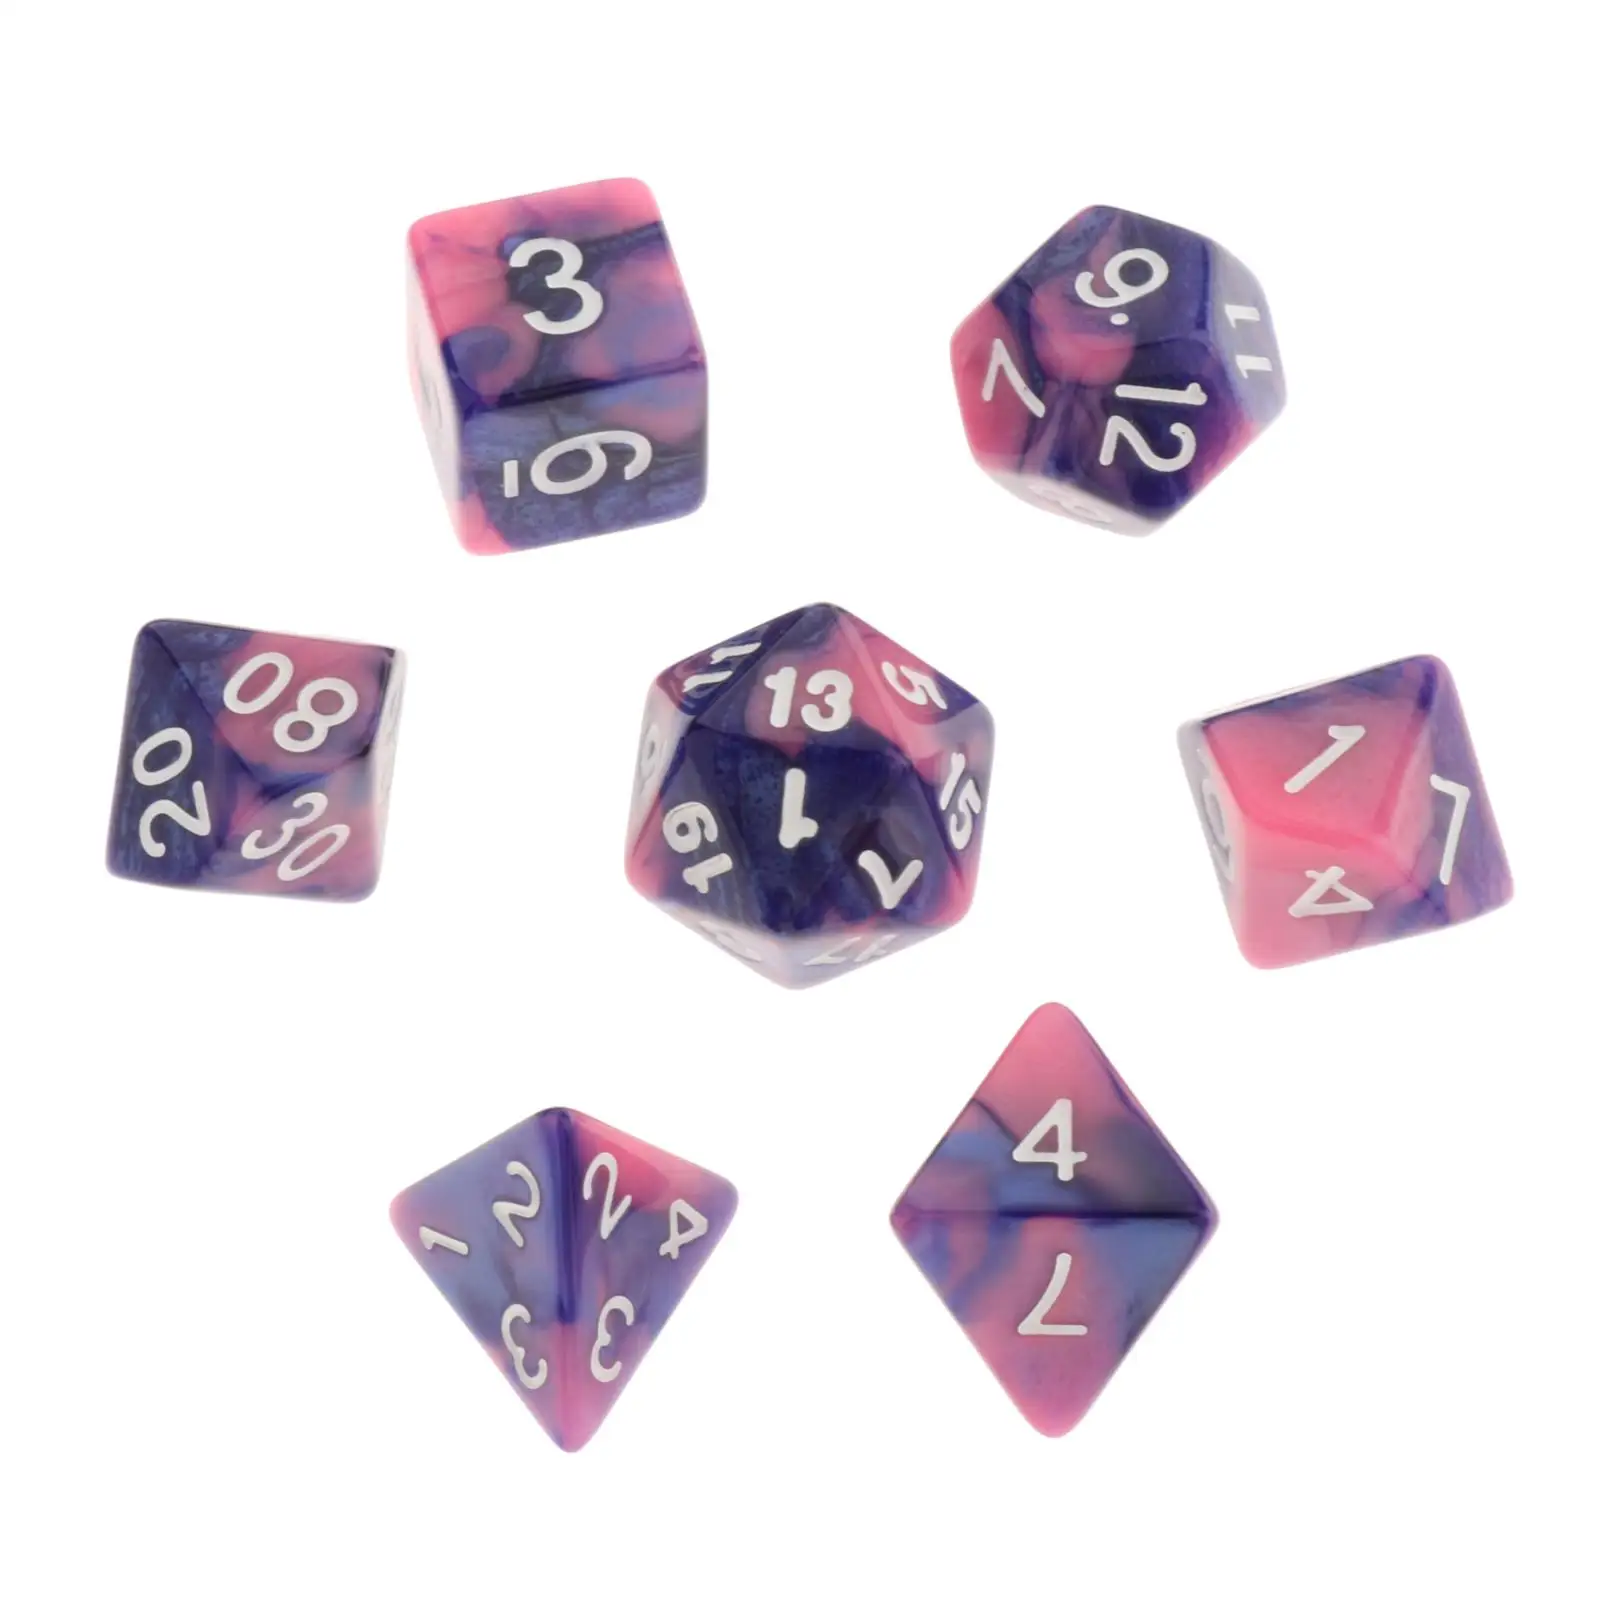 7pcs/set Polyhedral Games Dice Multi Sides Dice for Board Game Bloody Dice C1 F1 for sale online